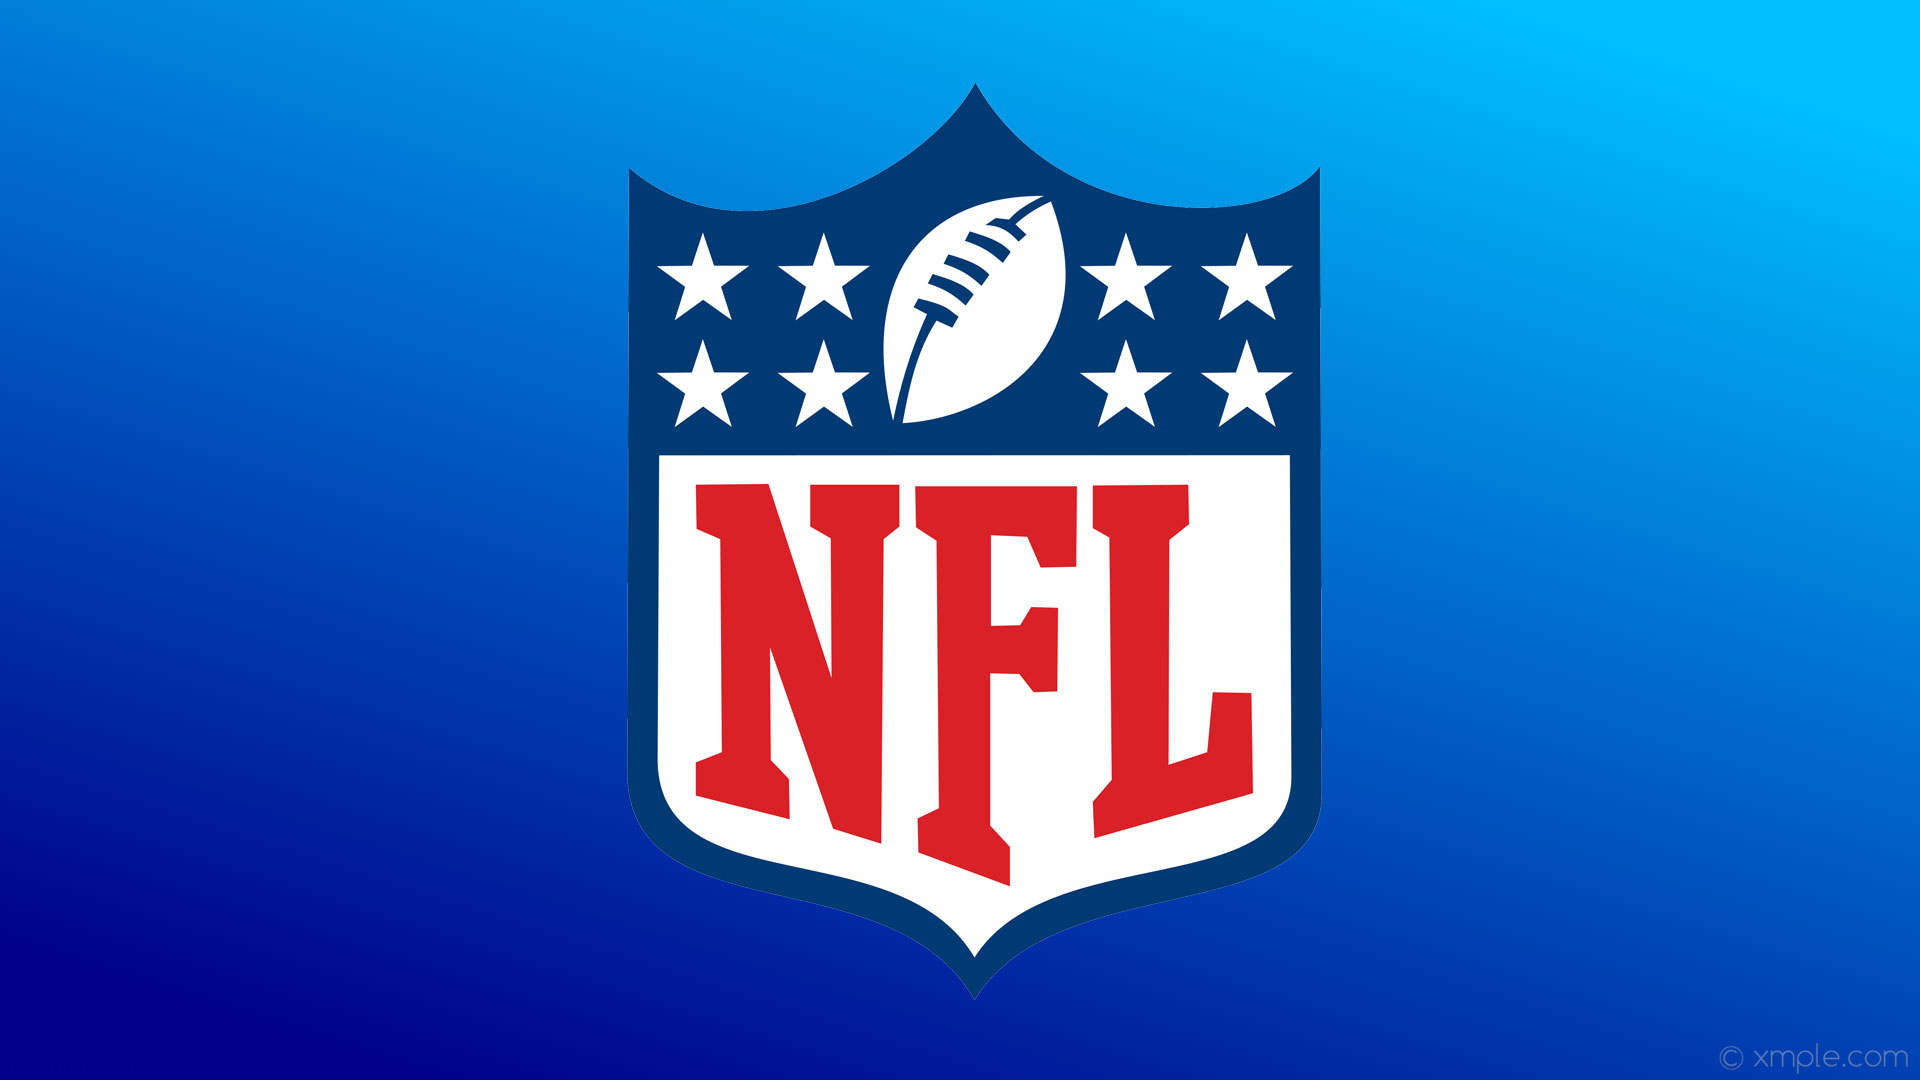 Discover How to Stream Free Football Games with the NFL Mobile App